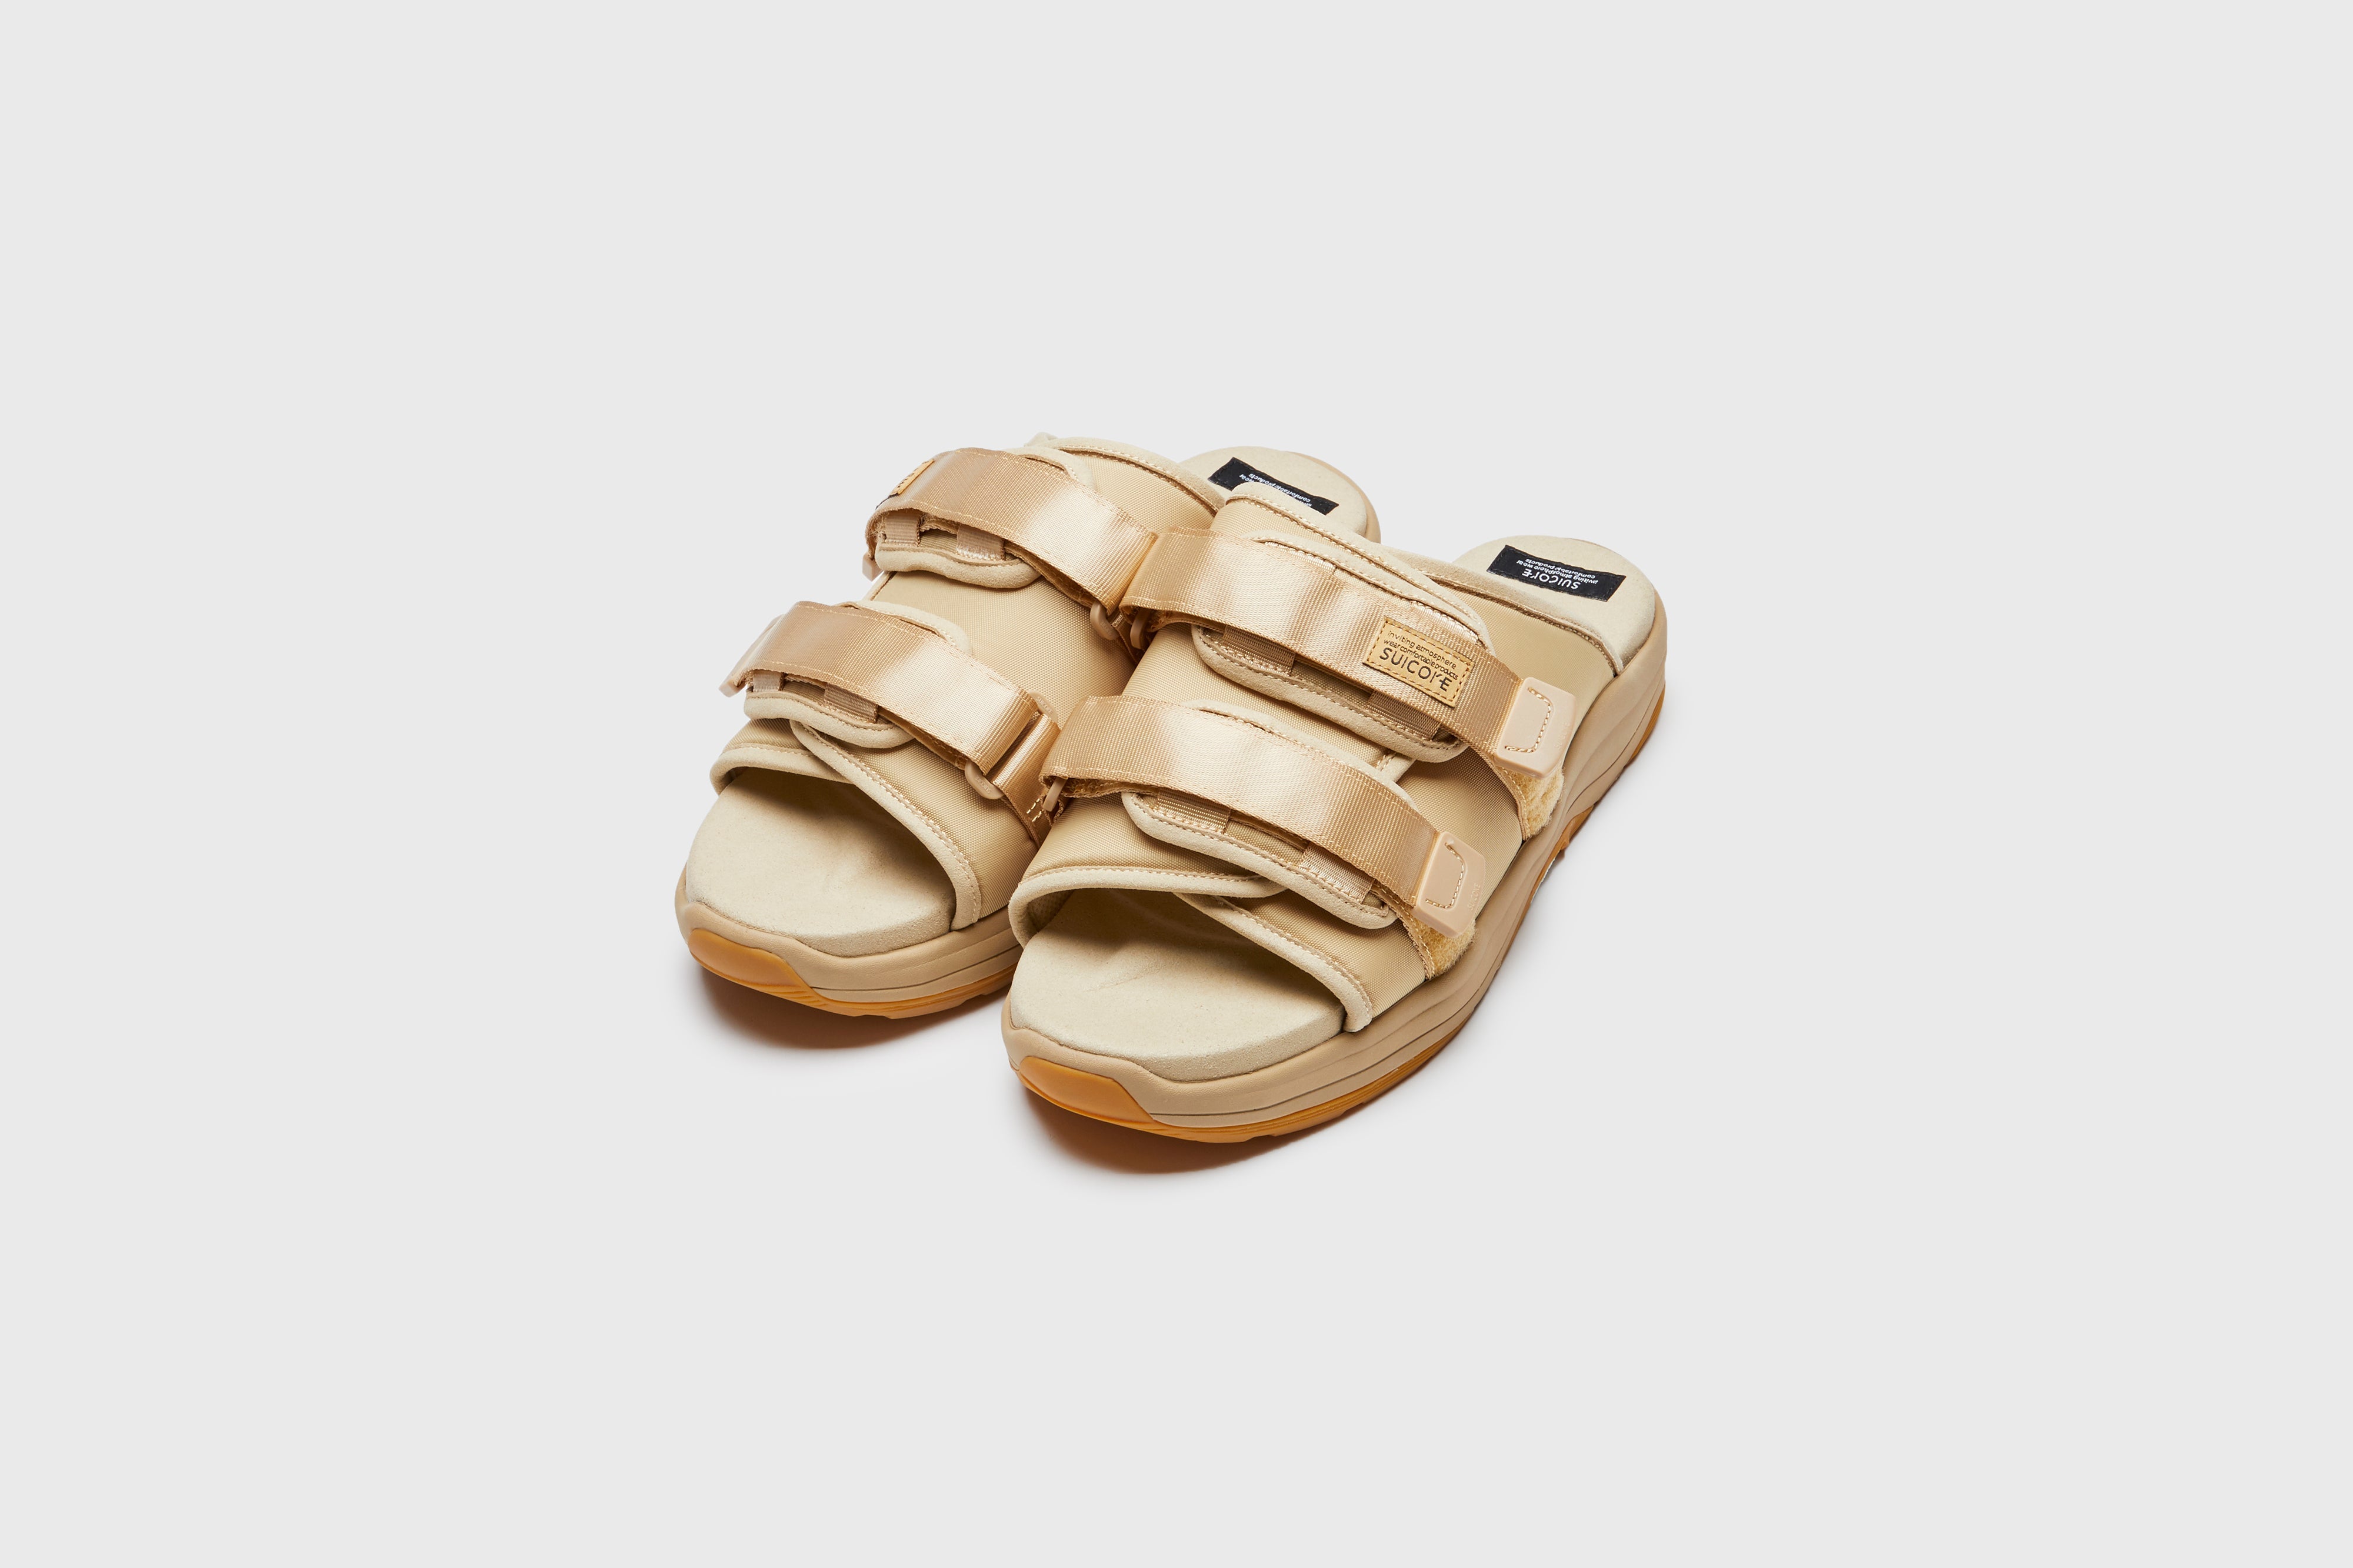 SUICOKE MOTO-Run slides with beige nylon upper, beige midsole and sole, strap and logo patch. From Spring/Summer 2023 collection on eightywingold Web Store, an official partner of SUICOKE. OG-332 BEIGE